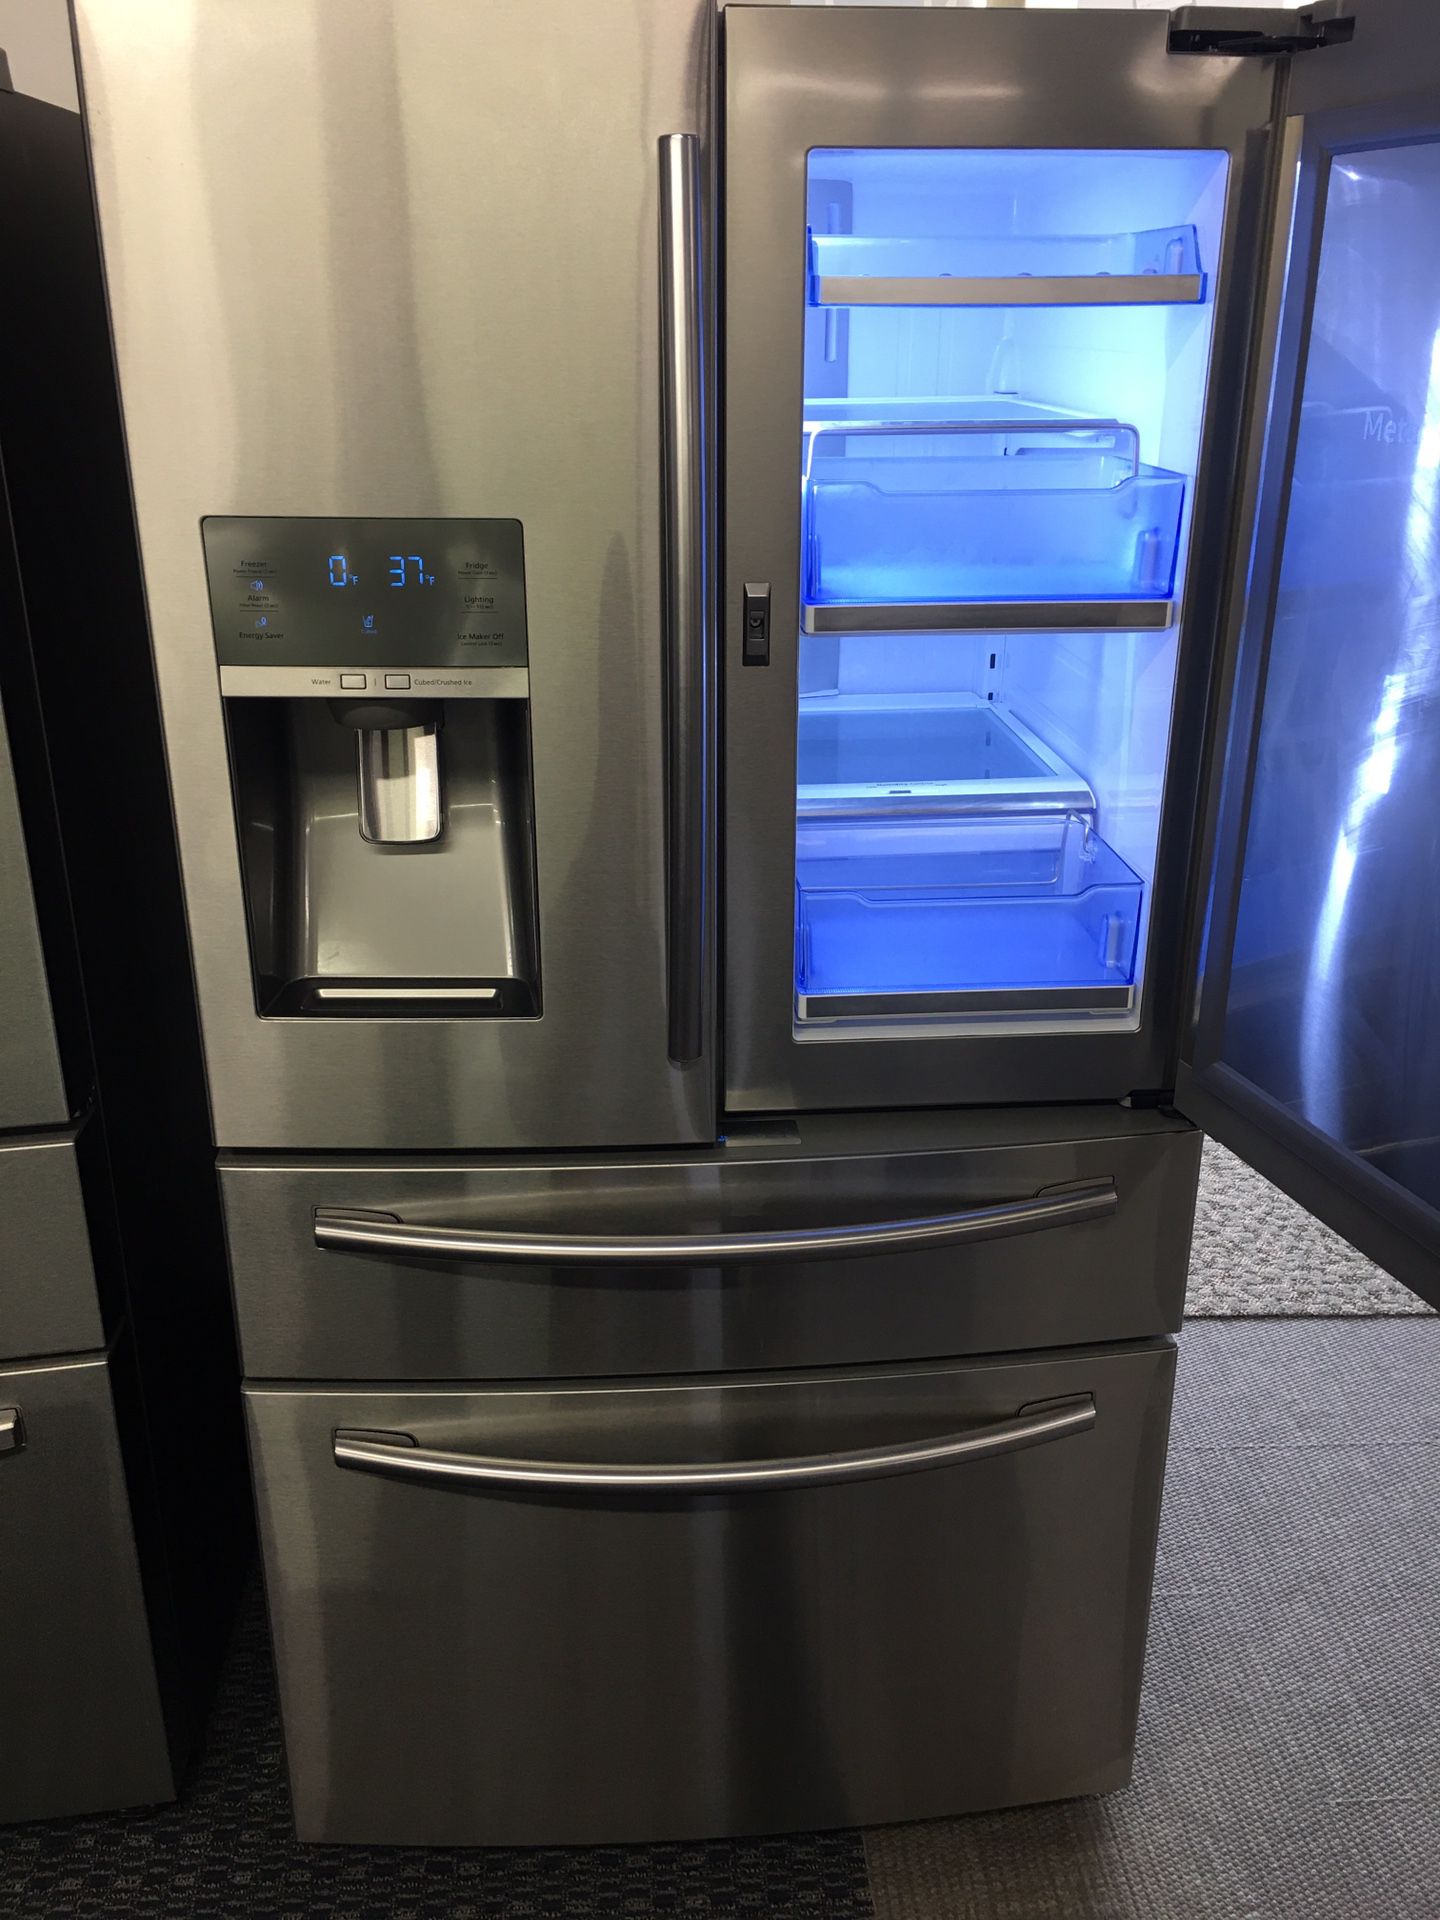 Samsung Stainless Steel 4 Door Refrigerator With Chosecase With Warranty No Credit Needed Just $49 Down payment Cash price $1,800